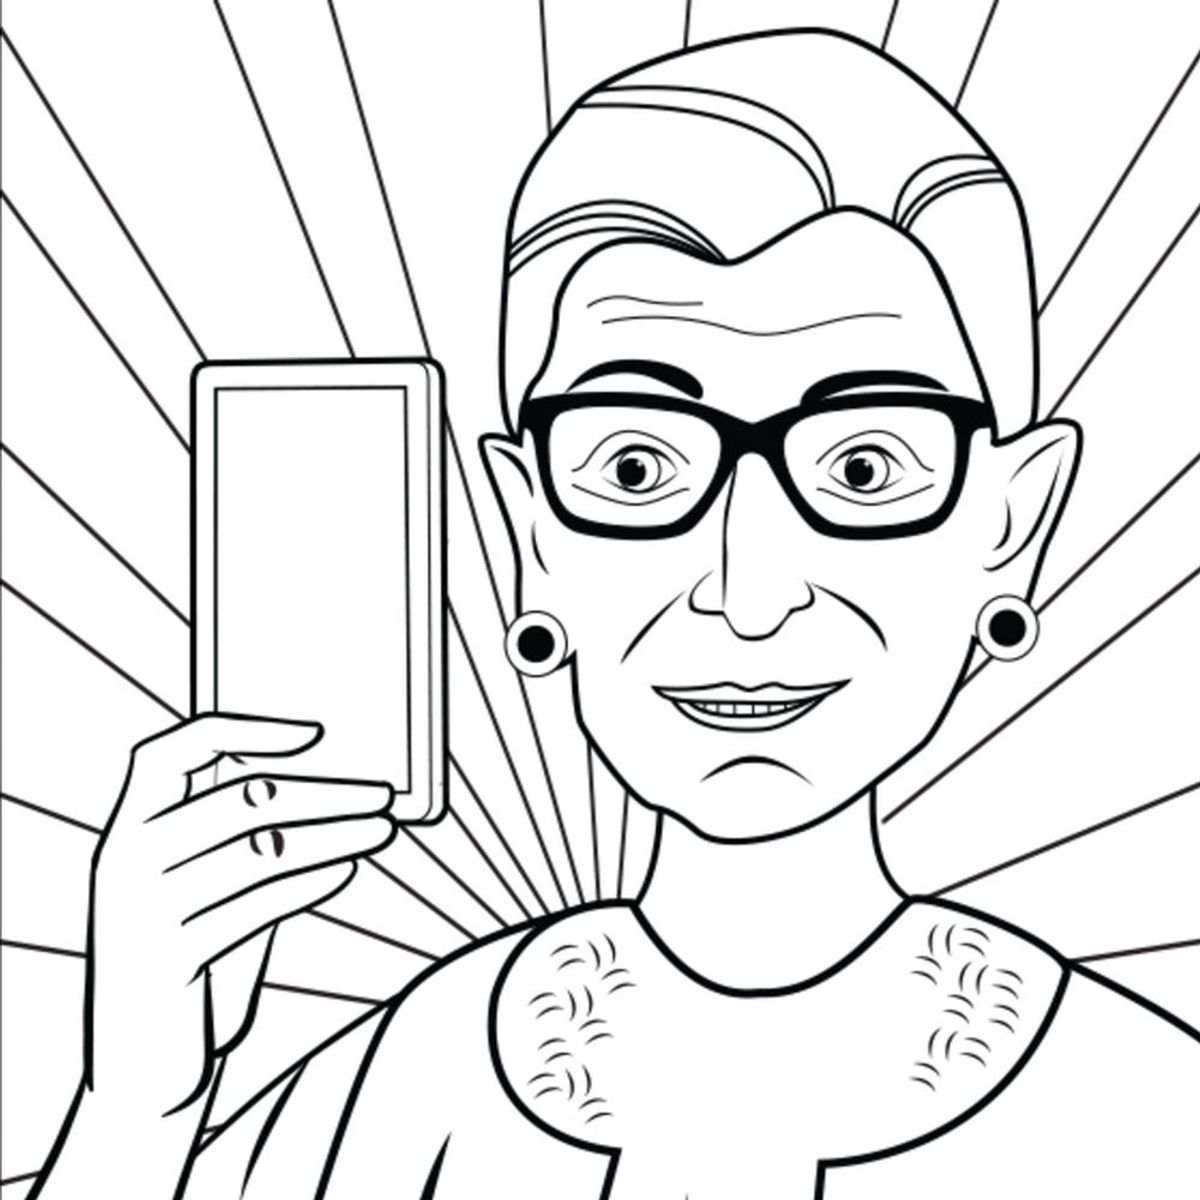 This Ruth Bader Ginsburg Is the Only Coloring Book You Need